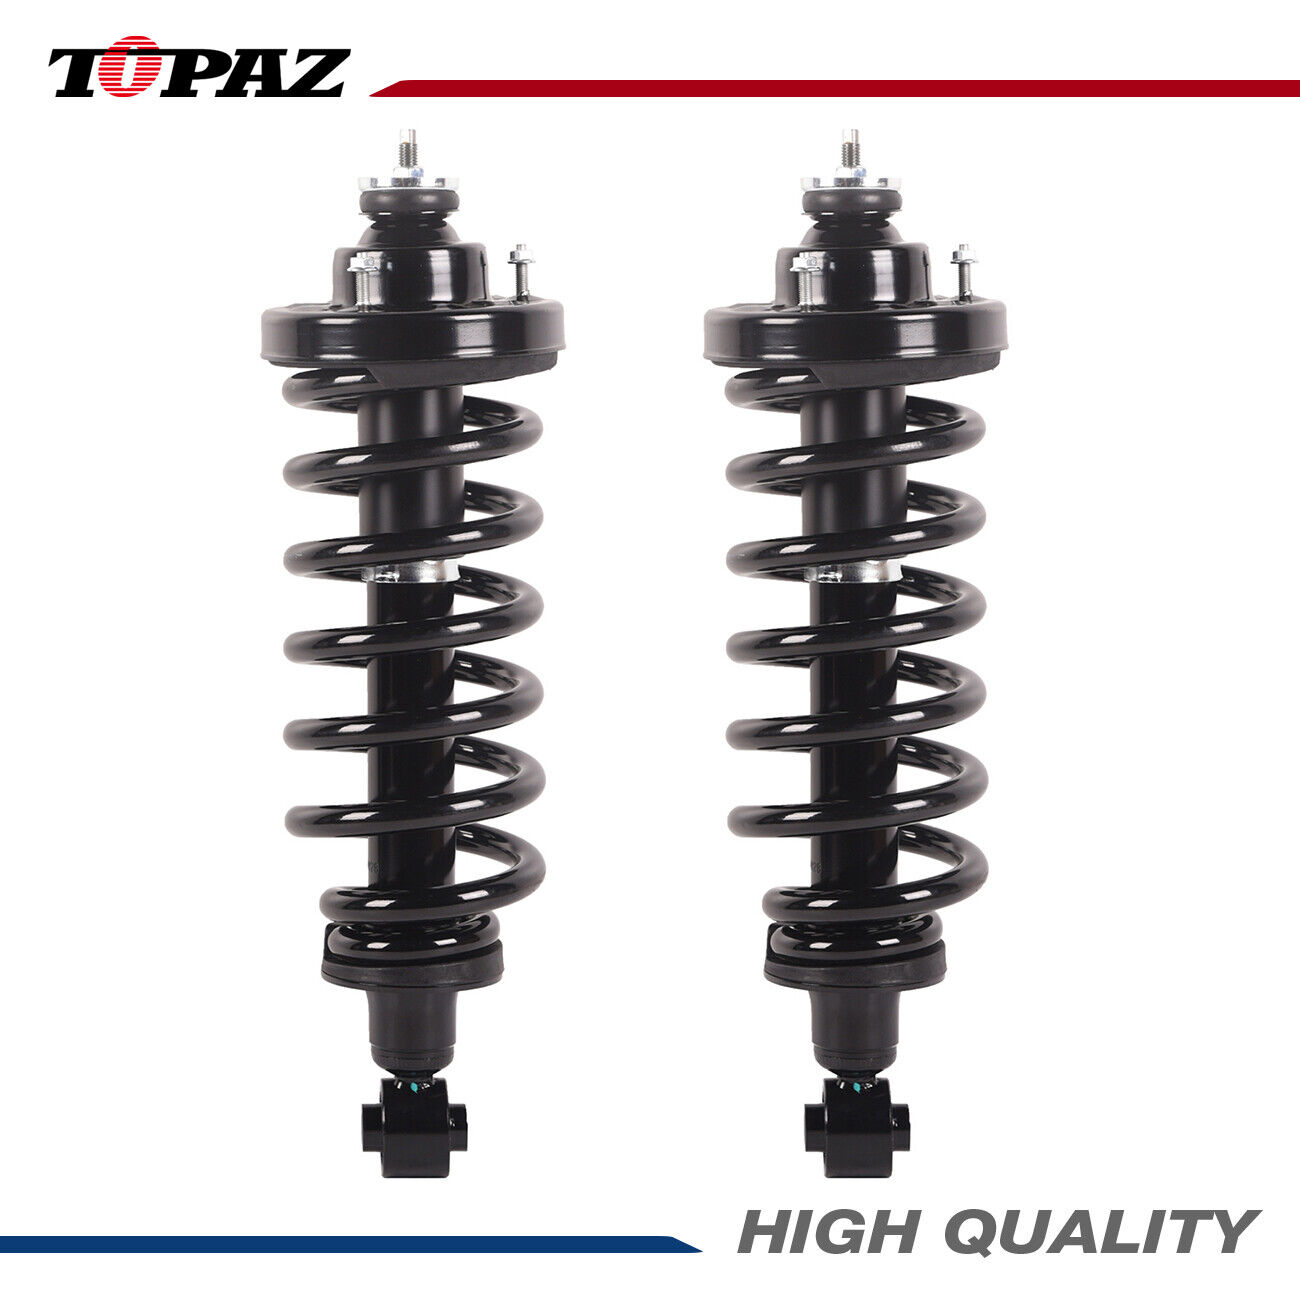 Pair Rear Complete Struts Coil Springs for Ford Explorer Mercury Mountaineer